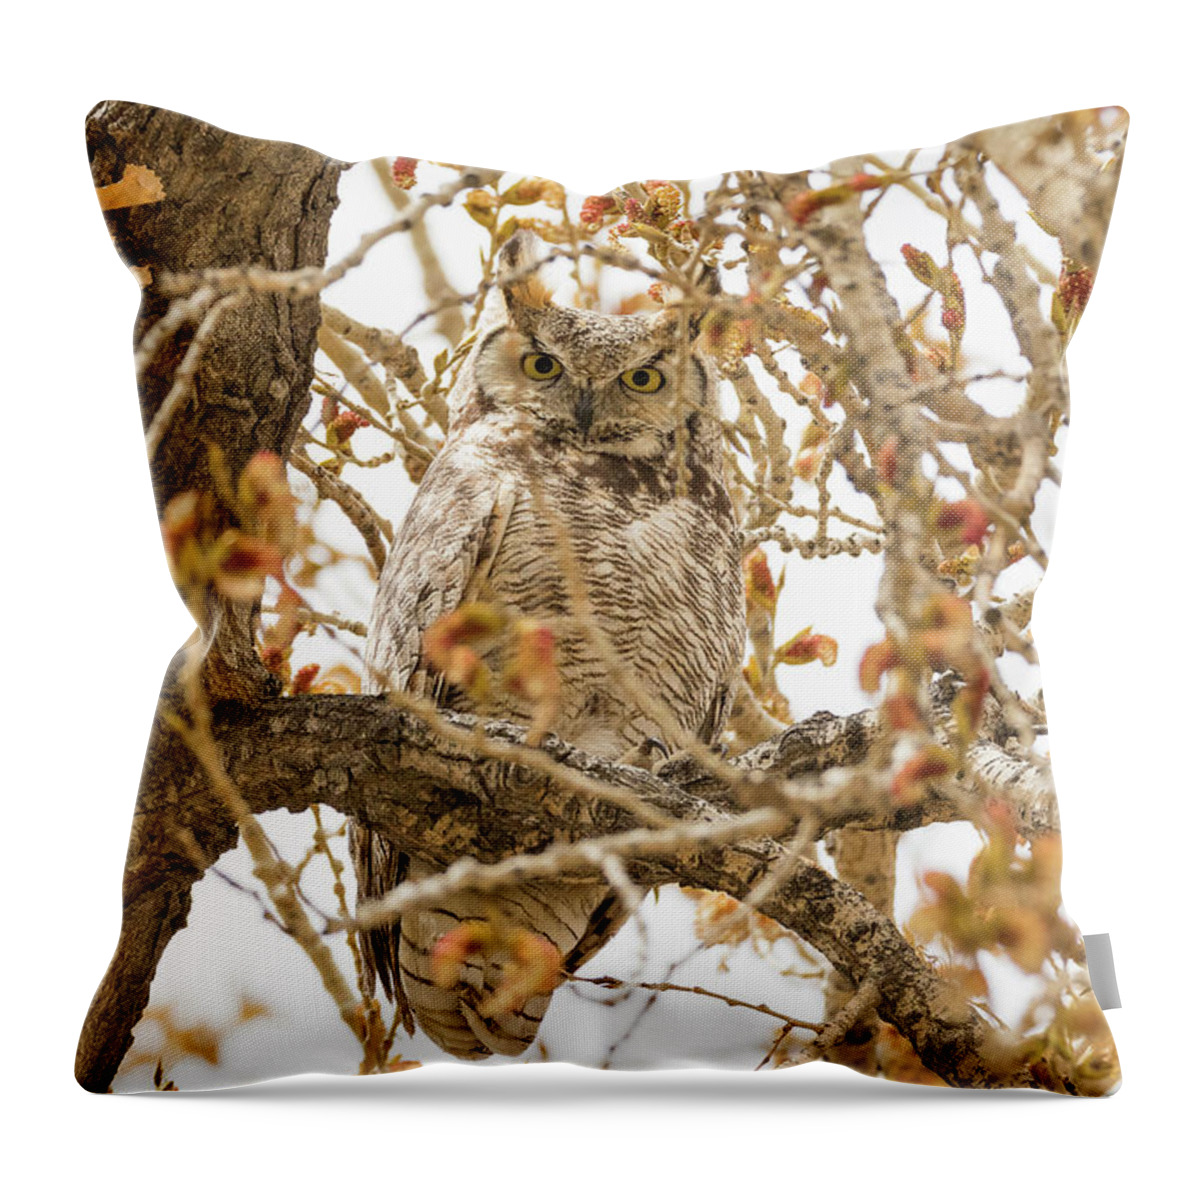 Owl Throw Pillow featuring the photograph Staring Great Horned Owl #1 by Tony Hake